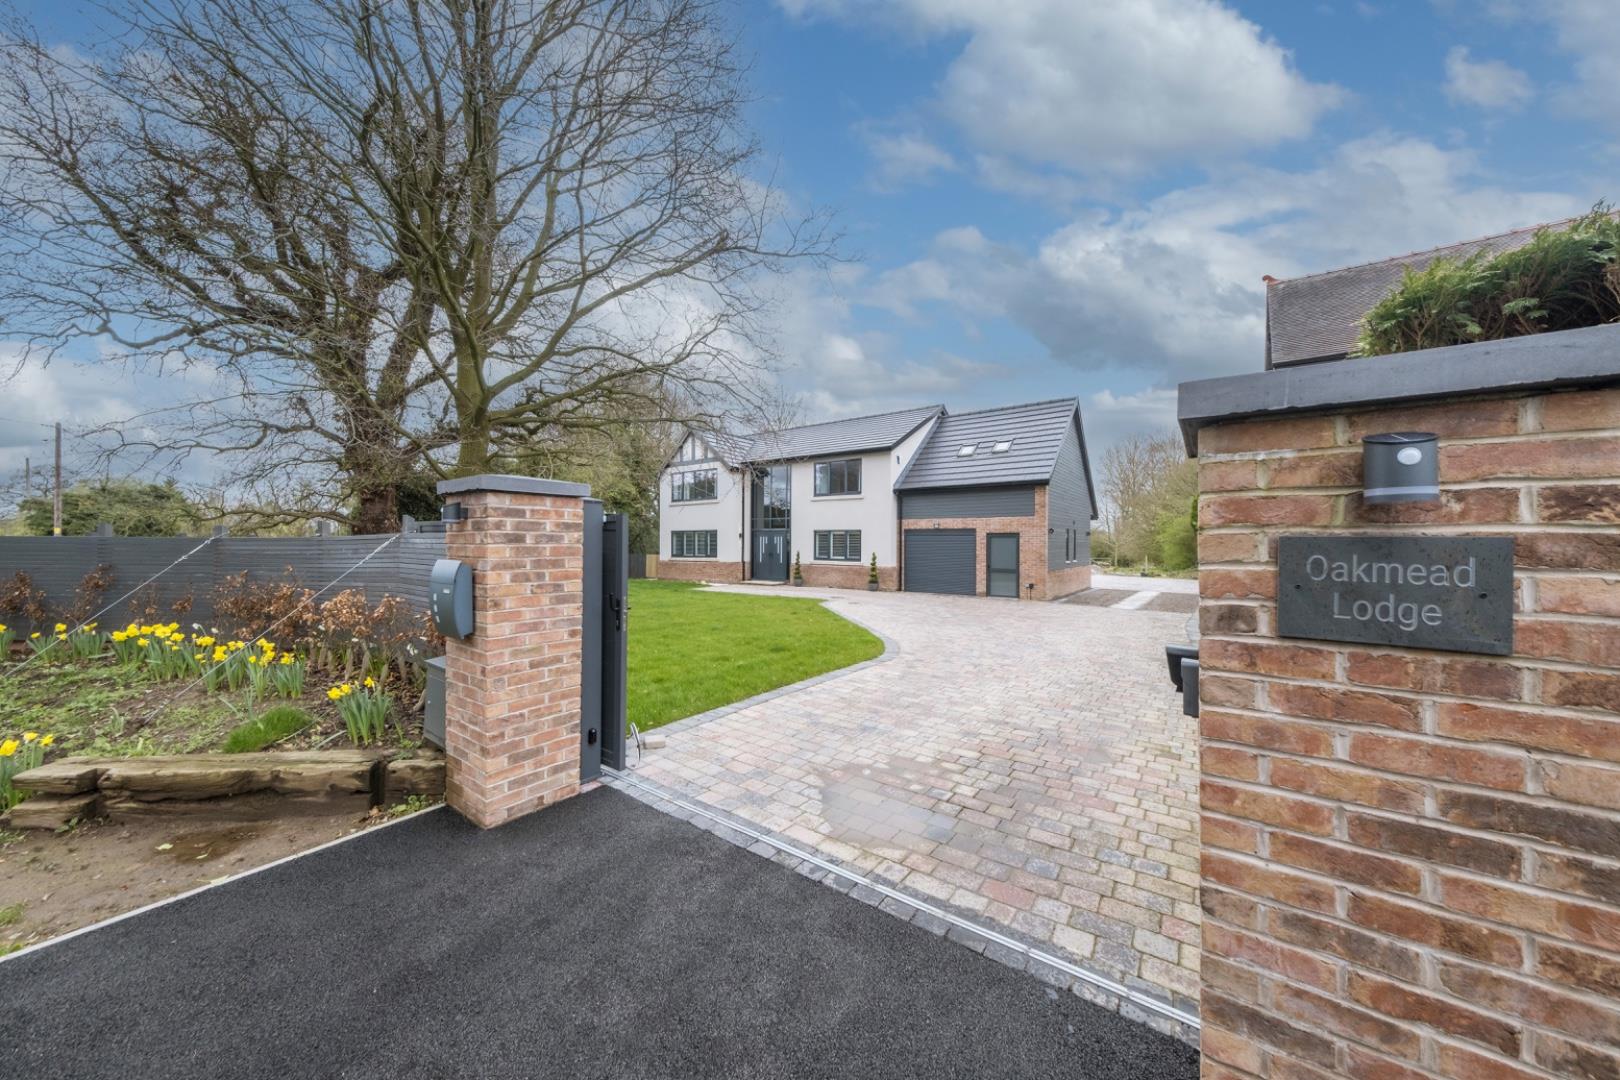 5 bedroom  Detached House for Sale in Spurstow